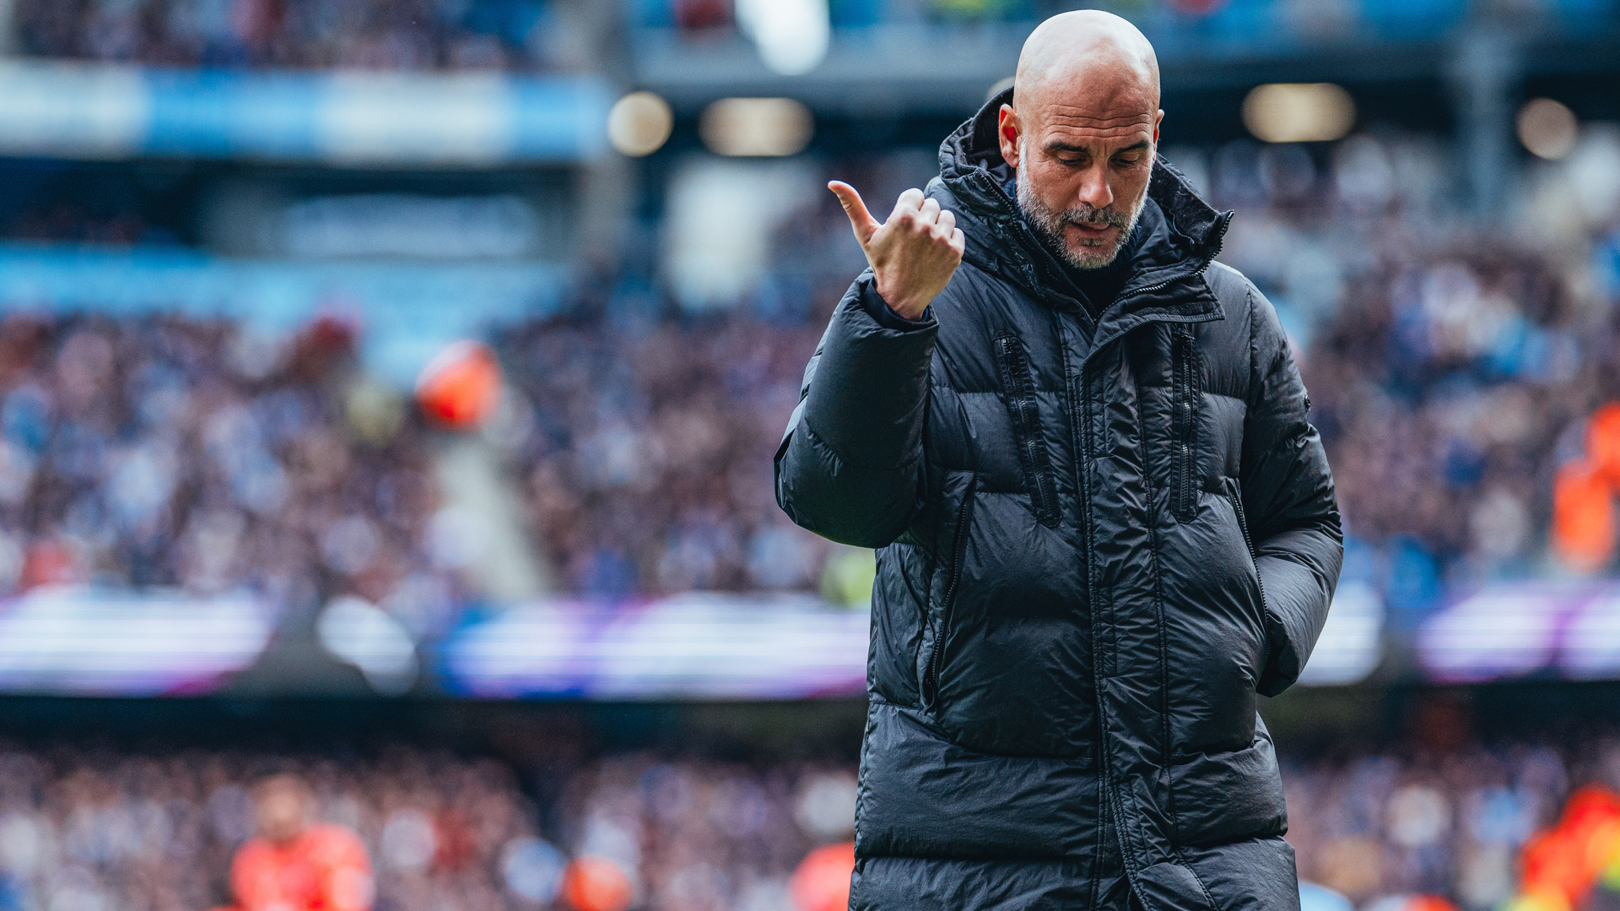 Guardiola: I love these type of games